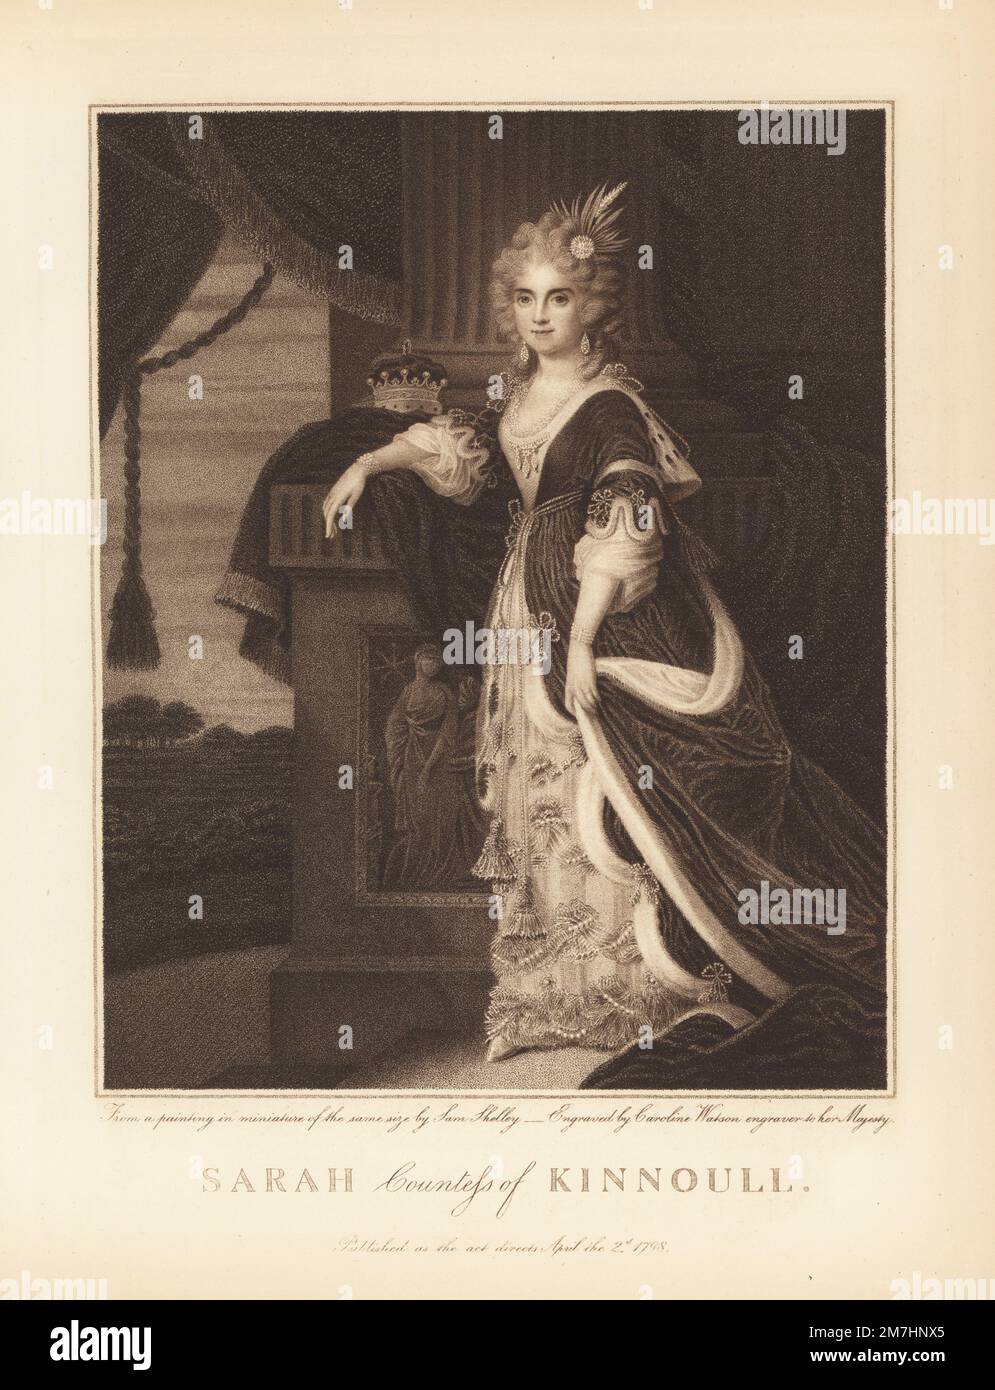 Sarah, Countess of Kinnoull, 1760-1837. Sarah Harley was the fourth daughter of Right Hon. Thomas Harley, Lord Mayor of London and married Robert Hay-Drummond, Earl of Kinnoull in 1781. In coronation robes: fur-lined cape, velvet gown, skirts decorated with pearls and jewels, coronet on a draped plinth. Copperplate stipple engraving by Caroline Watson after a miniature portrait by Samuel Shelley from Andrew W. Tuer's Bartolozzi and his Works, Field and Tuer, London, 1881. Stock Photo